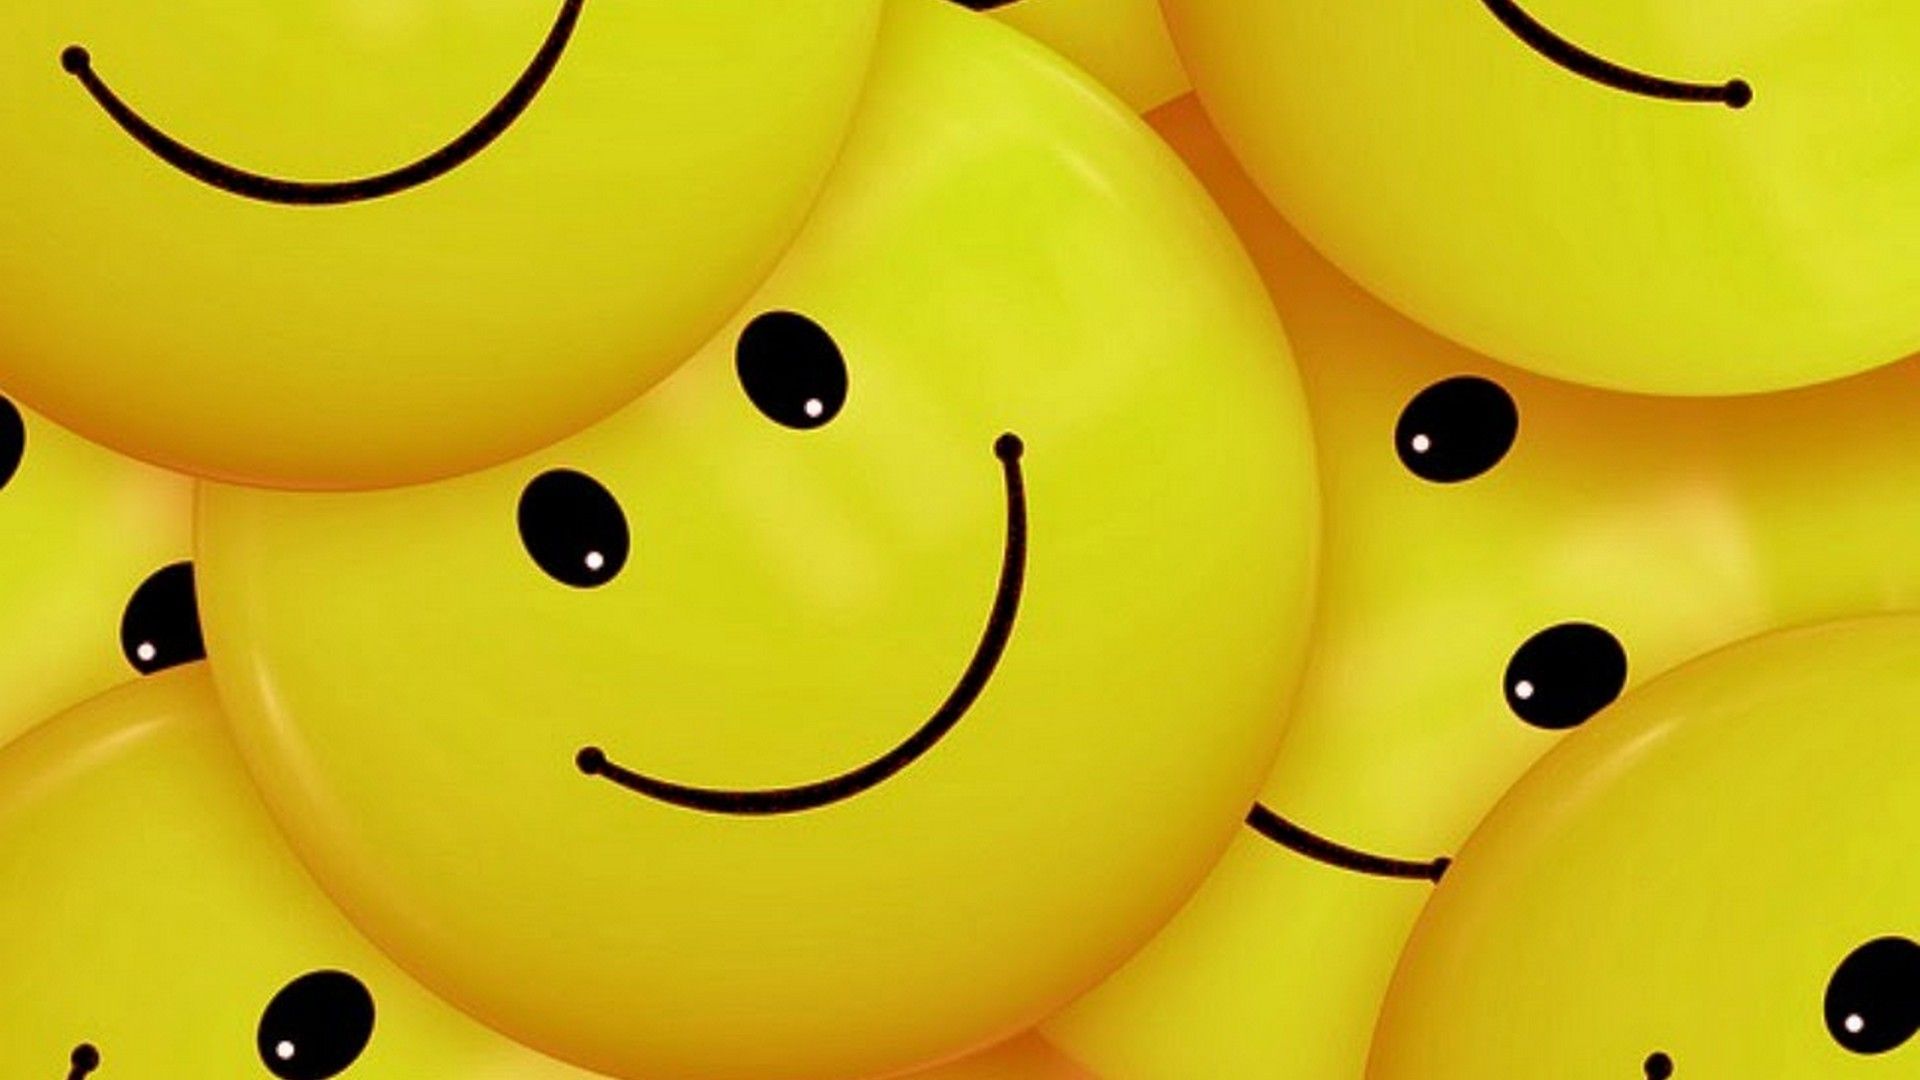 Computer Wallpaper Cute Yellow. Best Wallpaper HD. Smiley face image, Happy smiley face, Cute smiley face